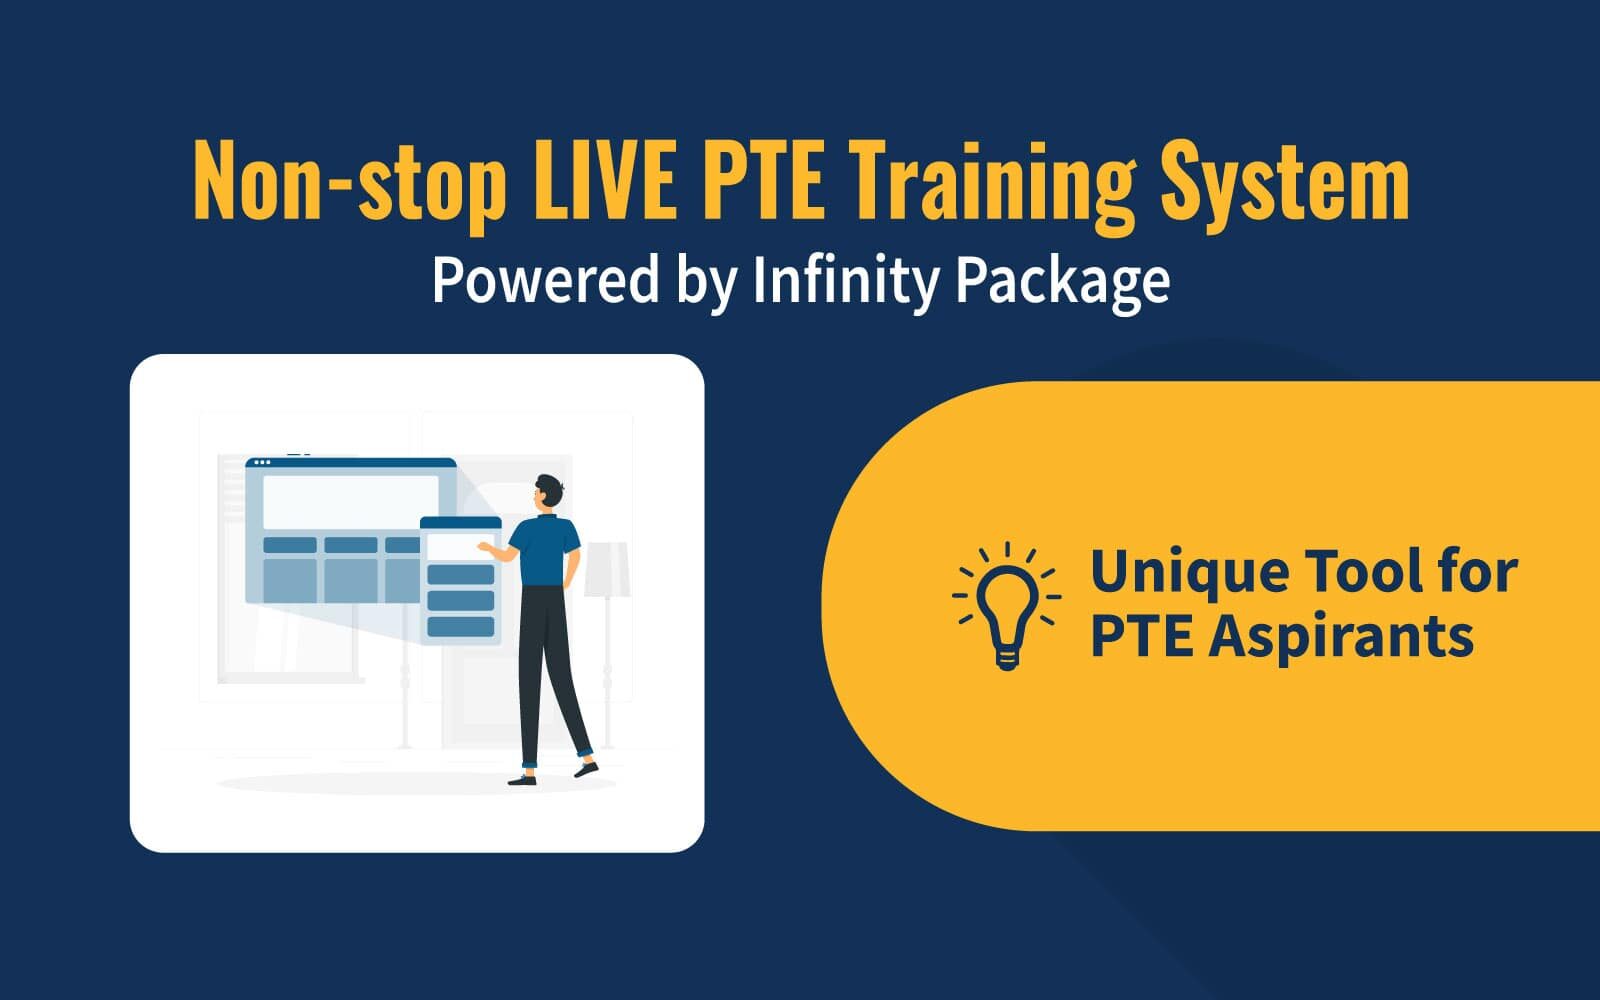 Non-stop LIVE PTE Training System Powered by Infinity Package